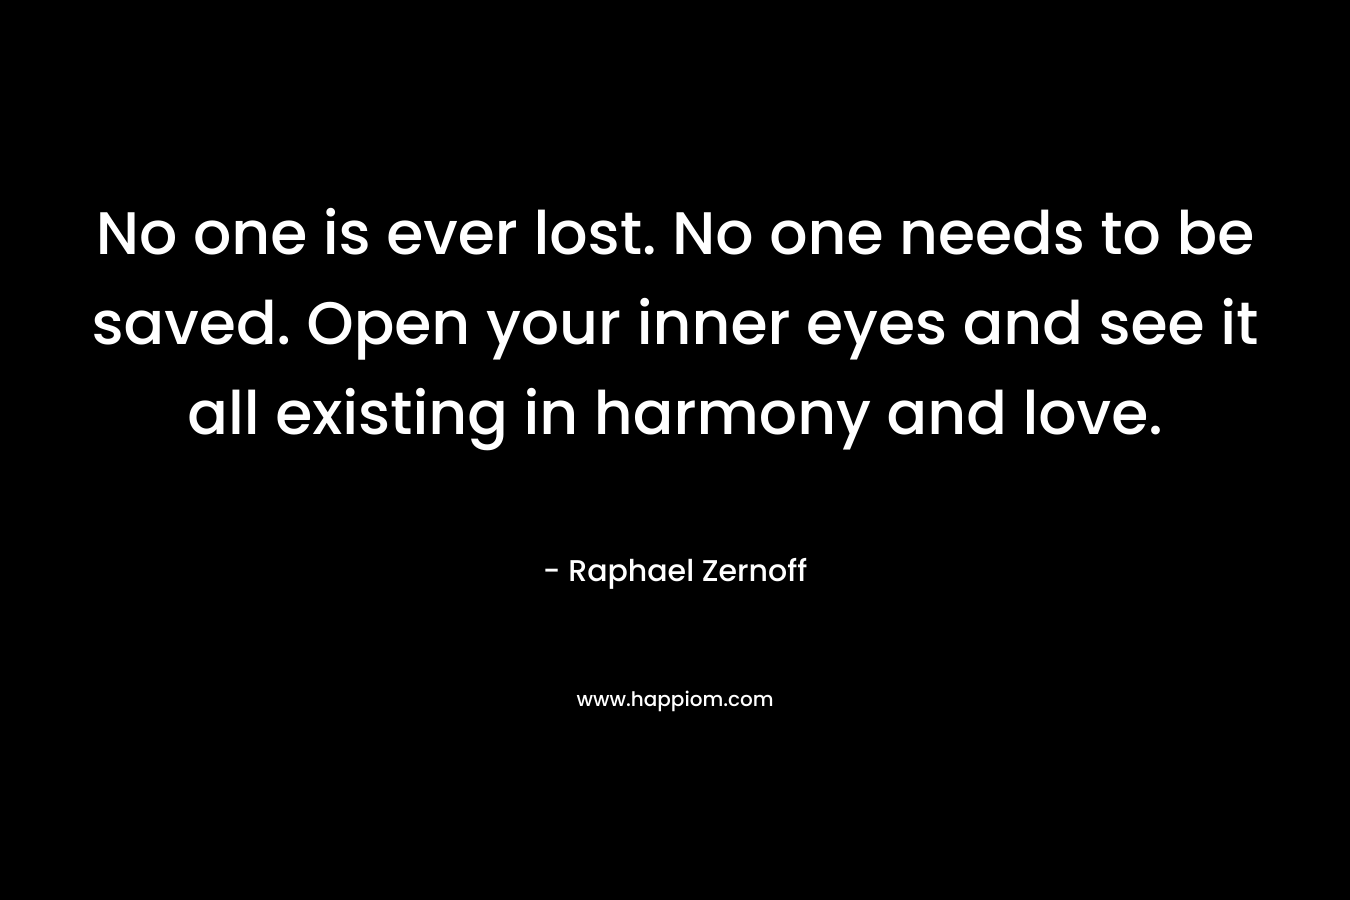 No one is ever lost. No one needs to be saved. Open your inner eyes and see it all existing in harmony and love. – Raphael Zernoff